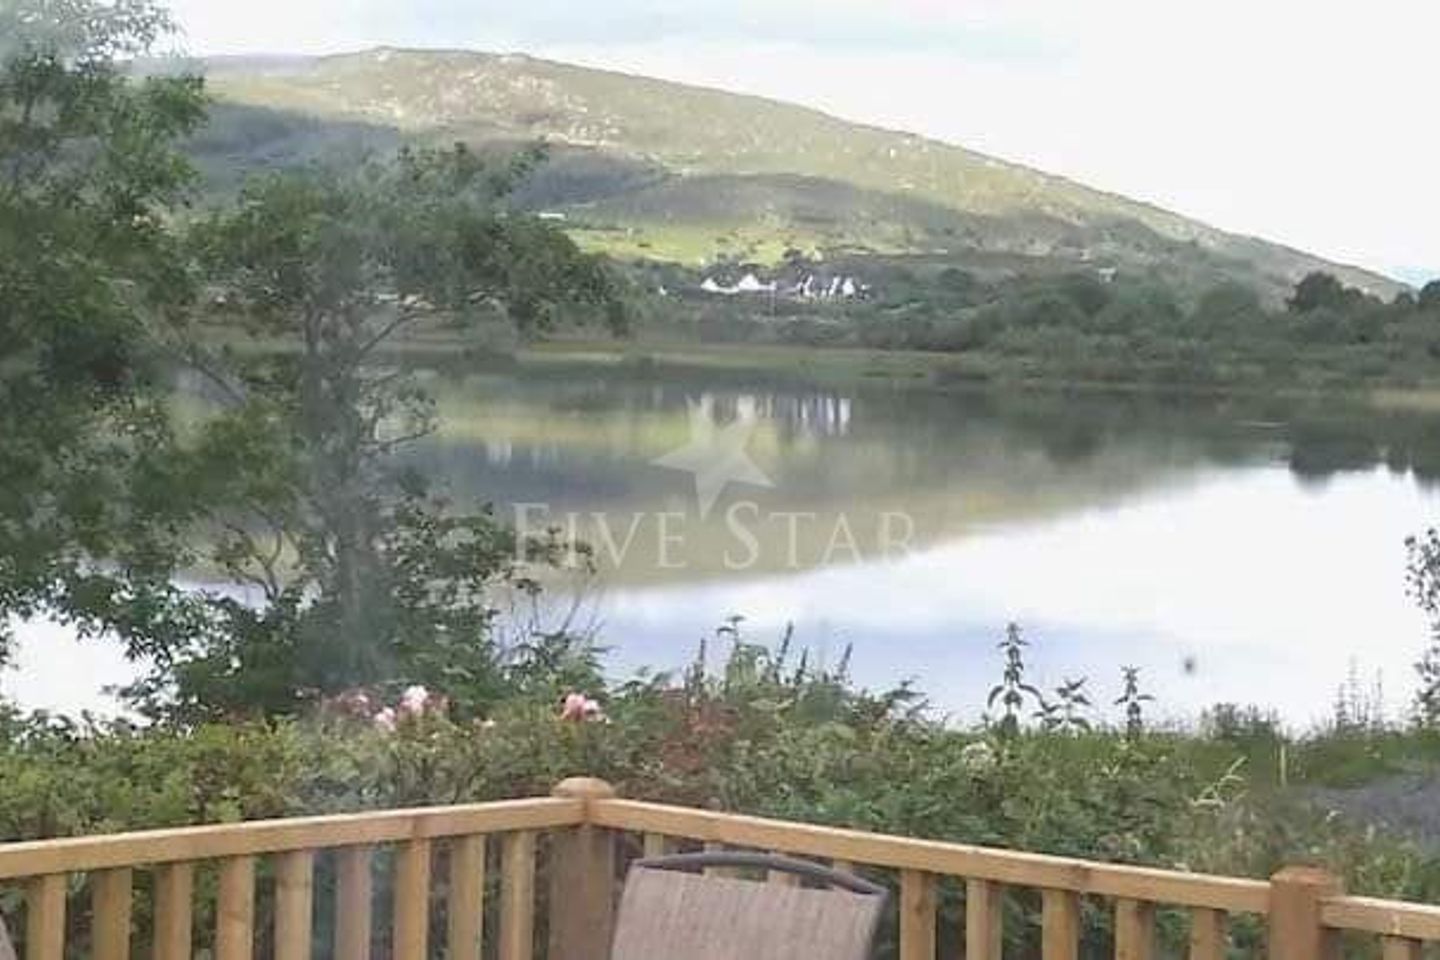 Glengowla West, Oughterard, Co. Galway